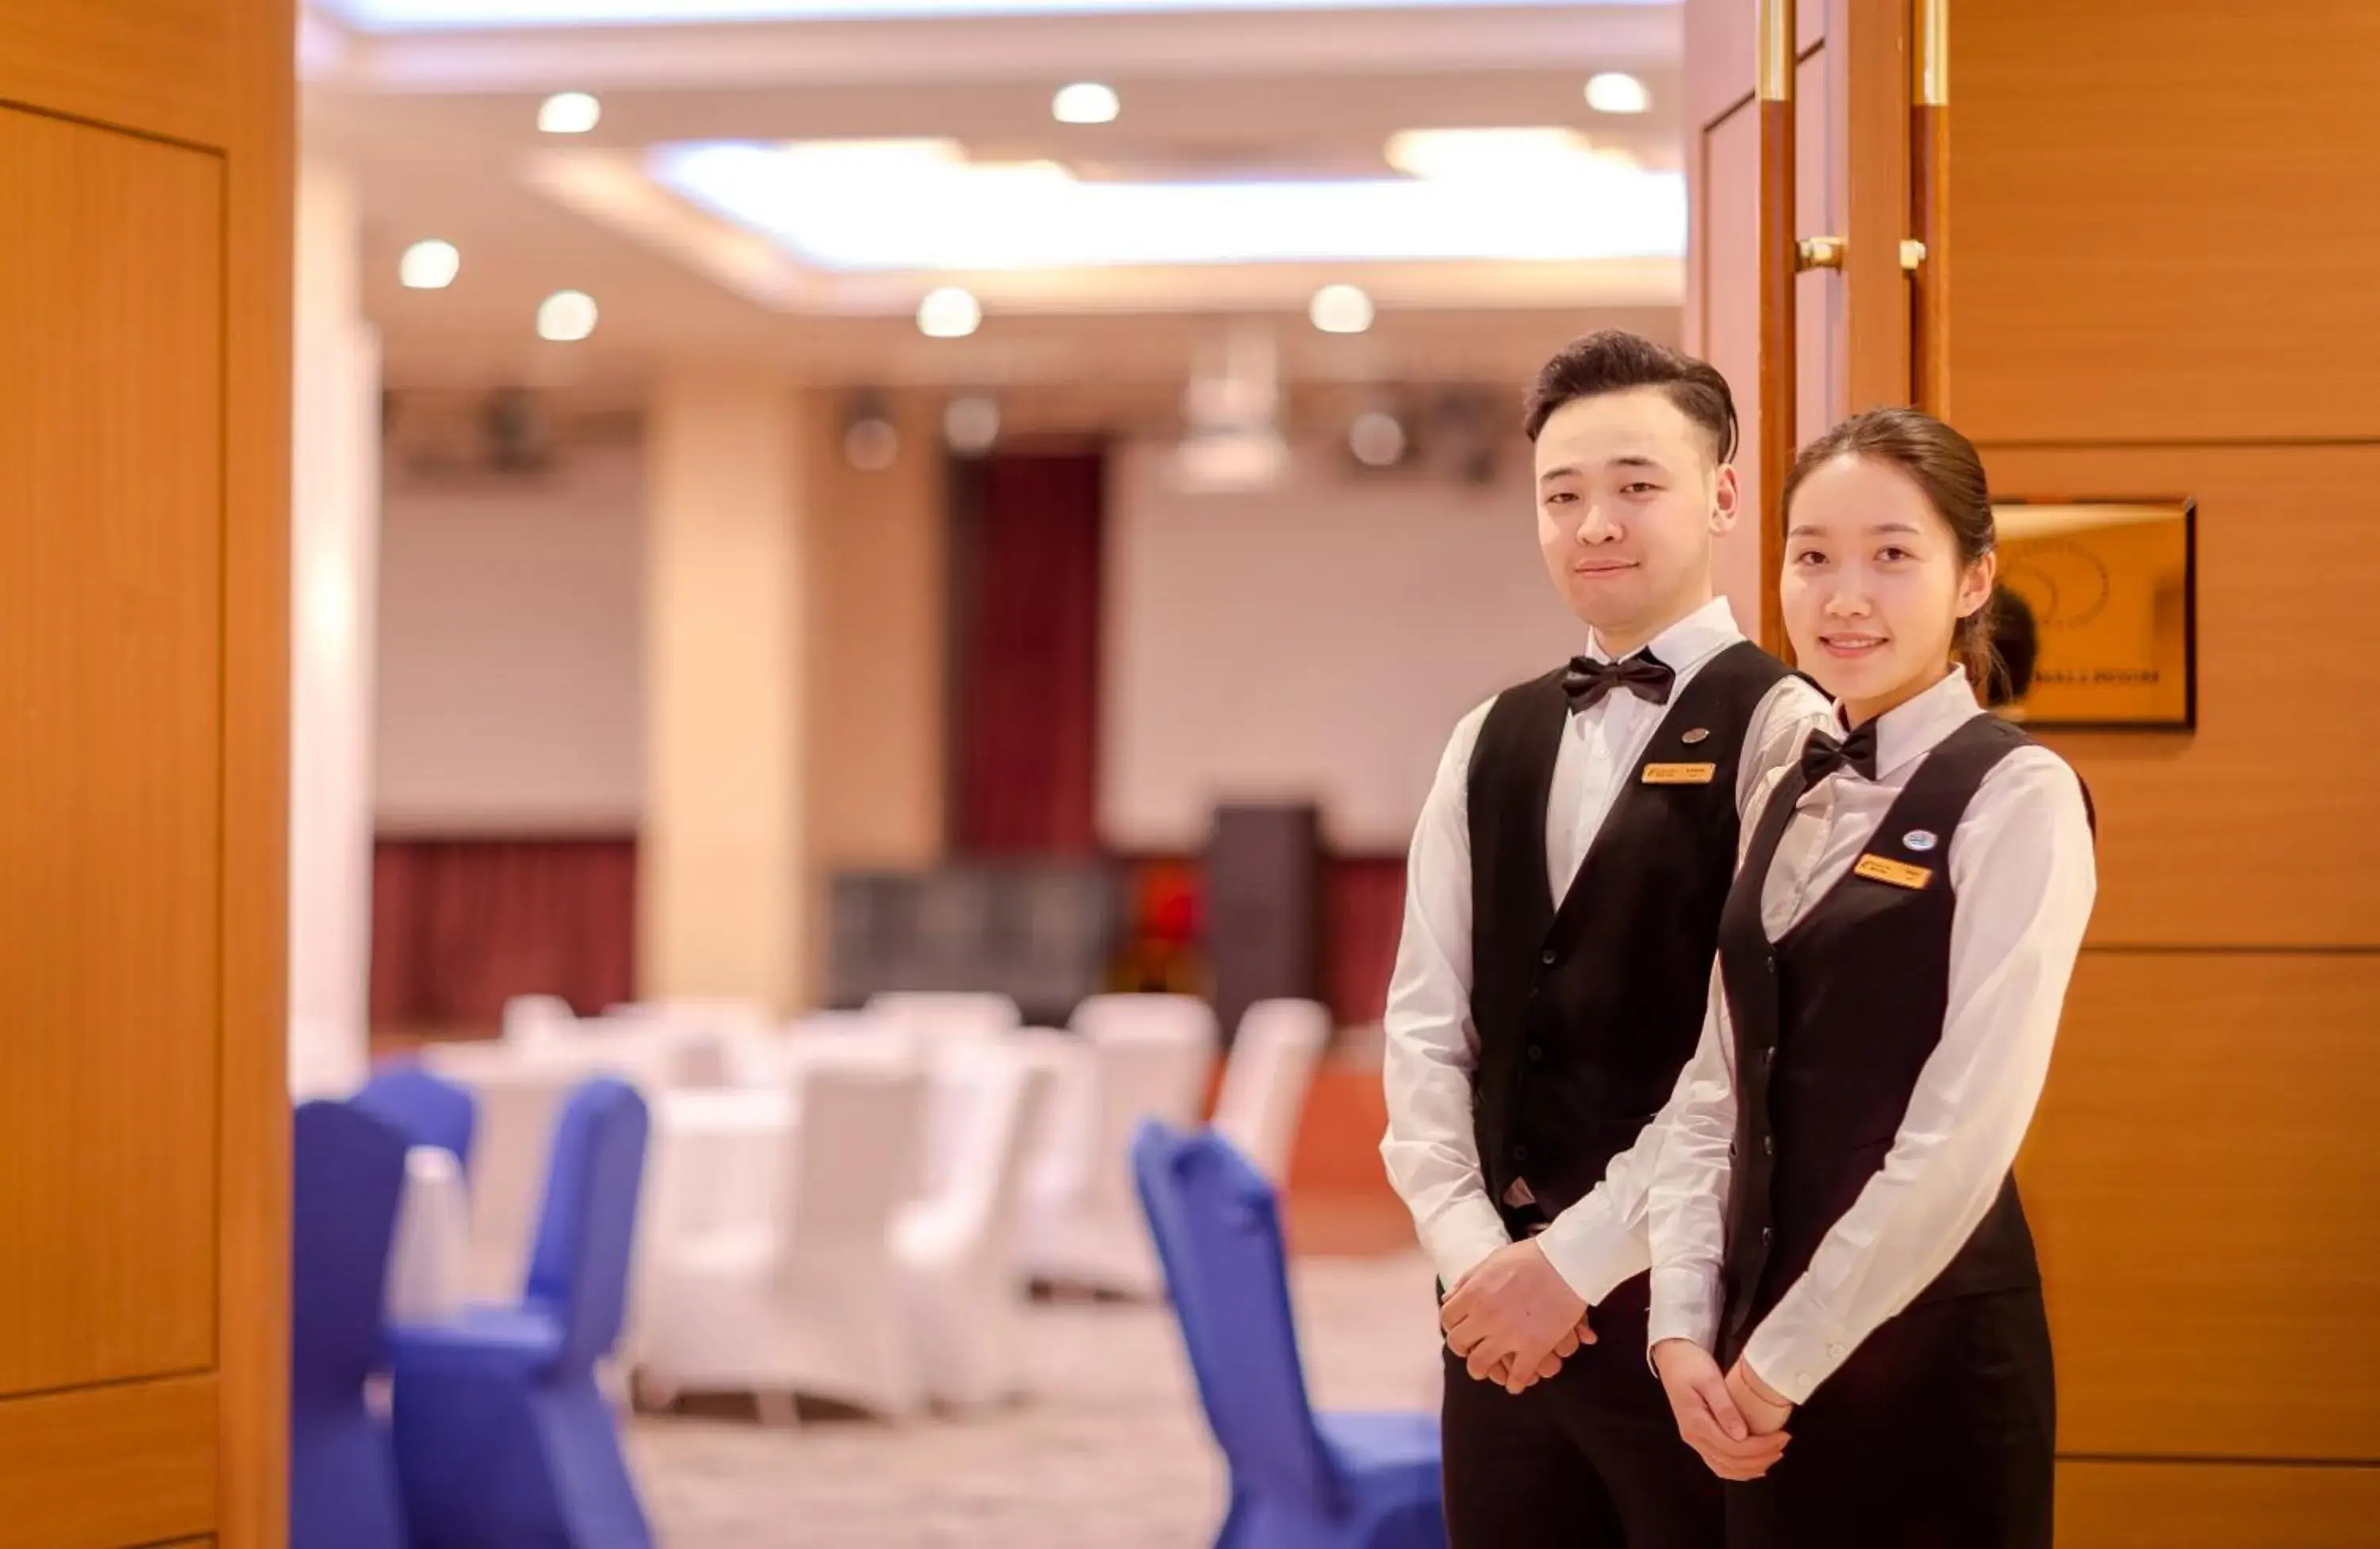 Banquet/Function facilities in The Blue Sky Hotel and Tower